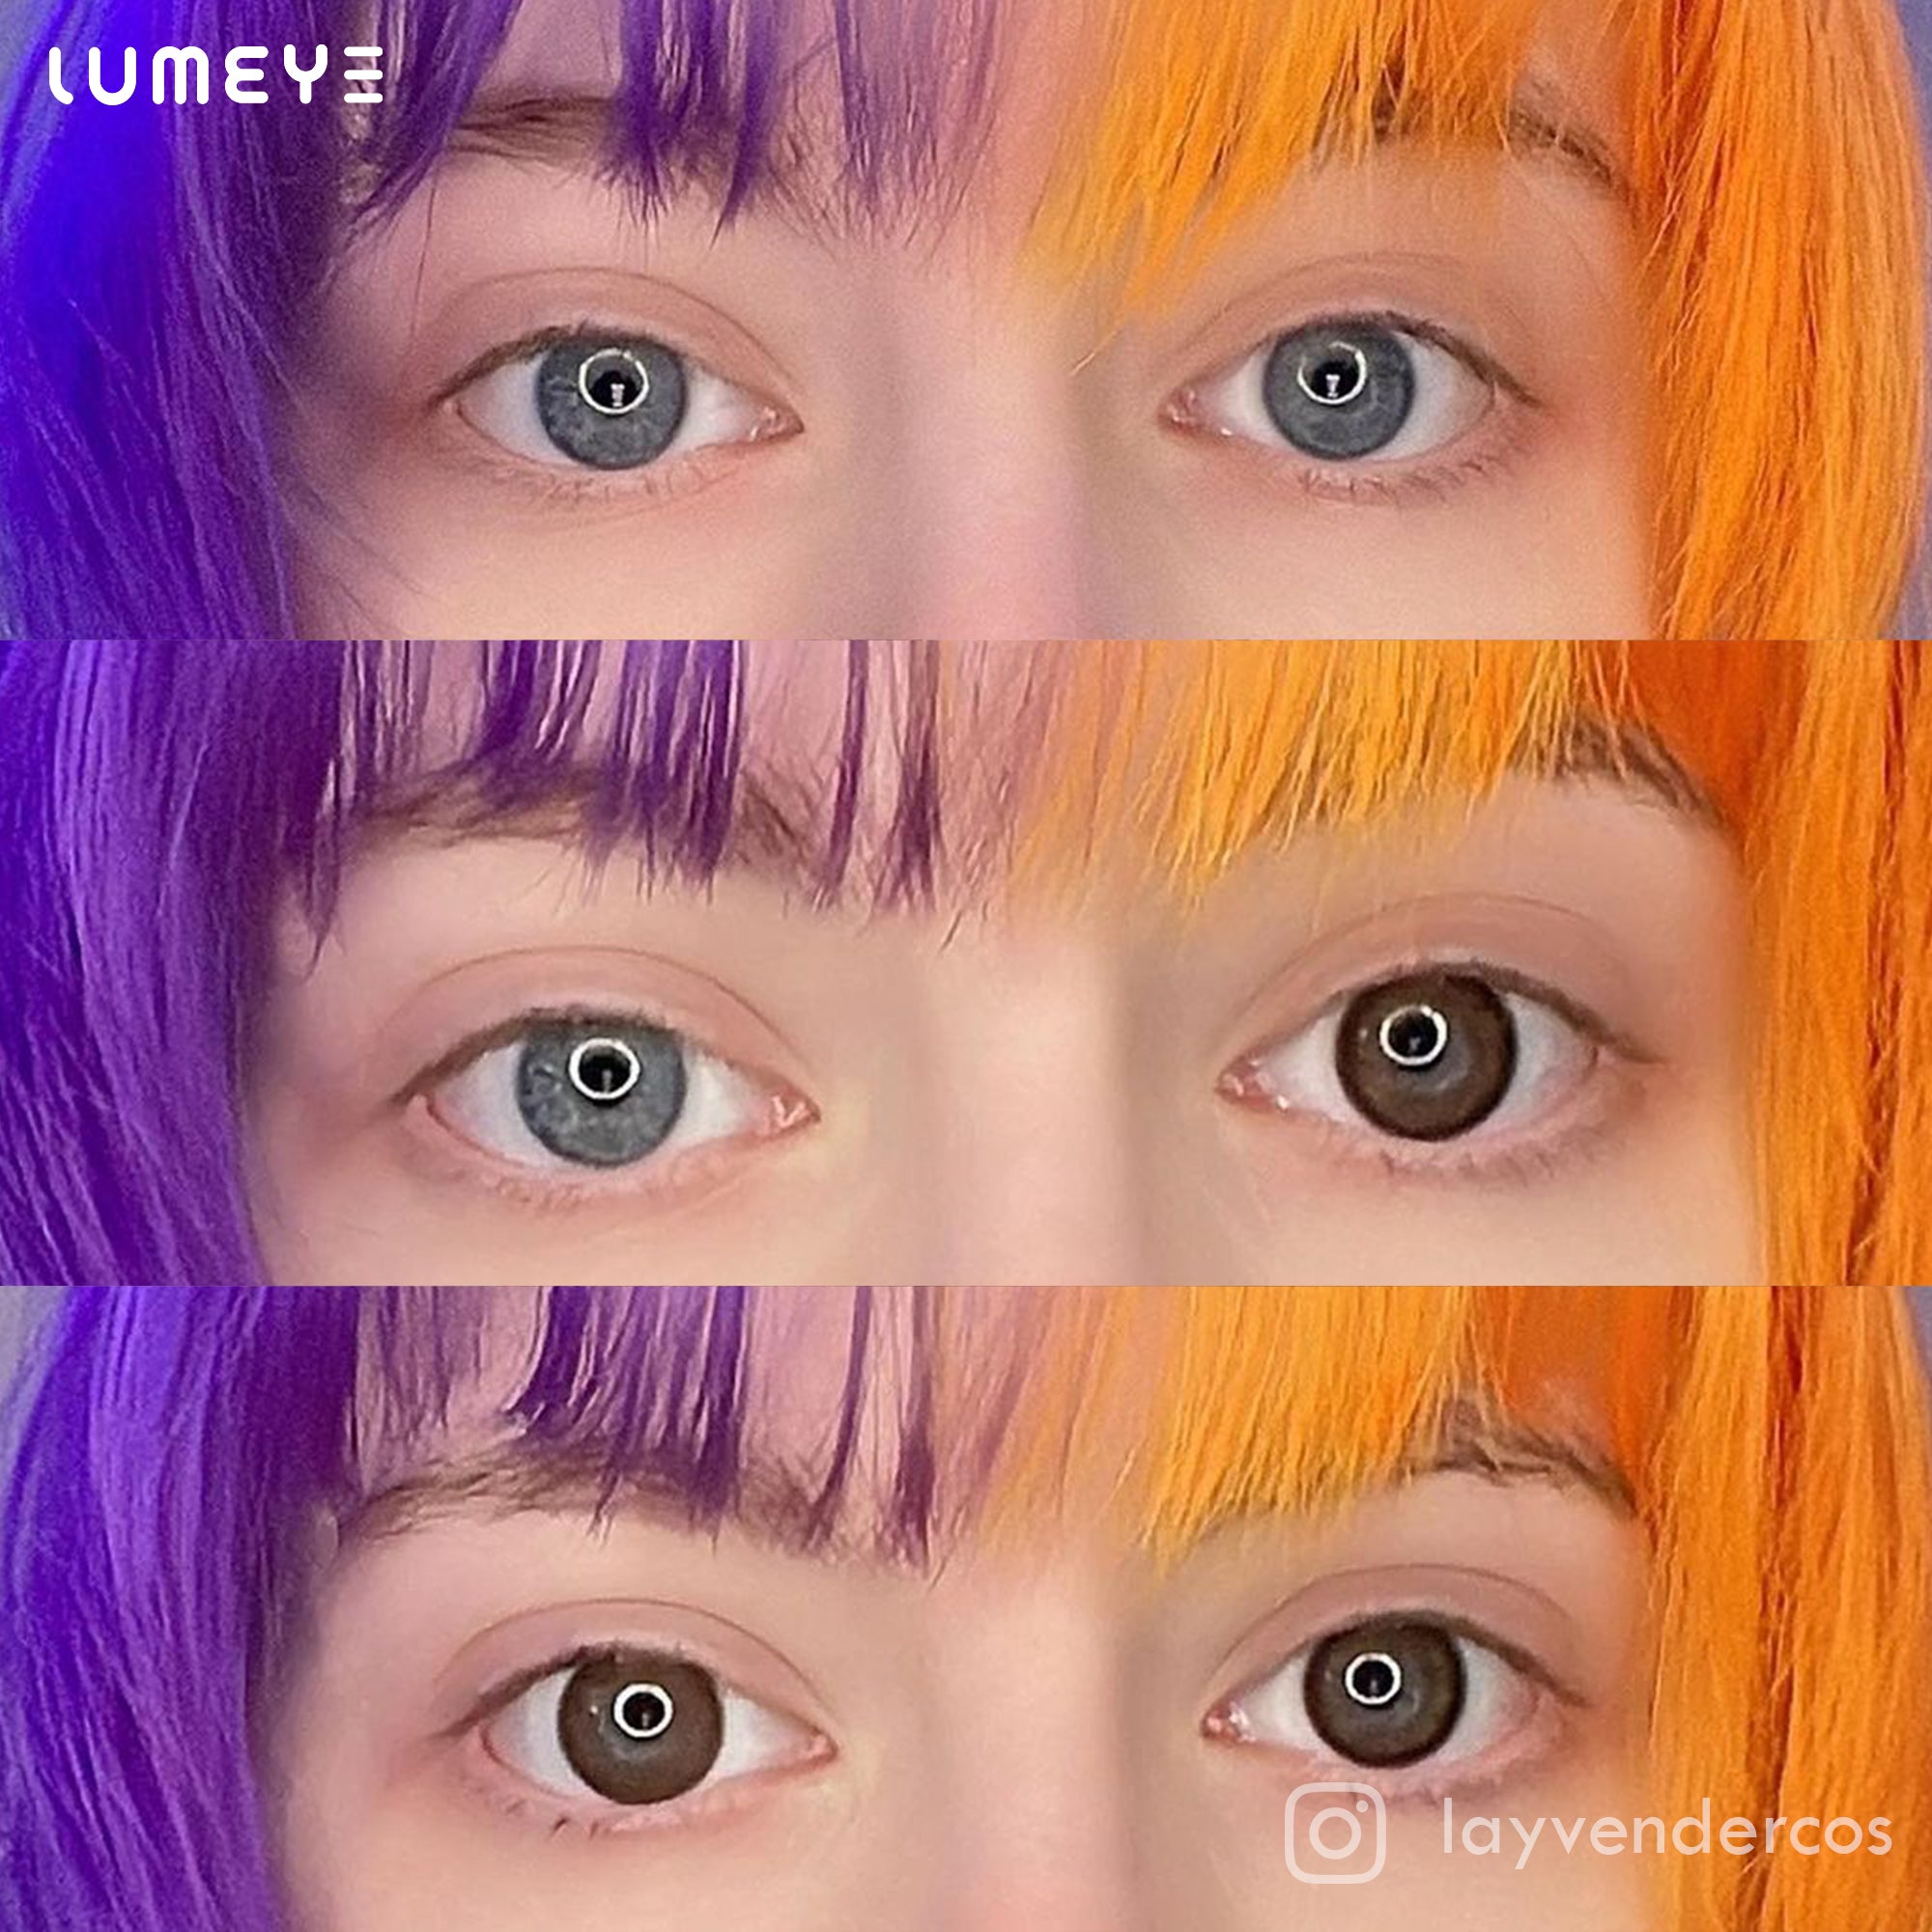 Best COLORED CONTACTS - LUMEYE Tiramisu Brown Colored Contact Lenses - LUMEYE